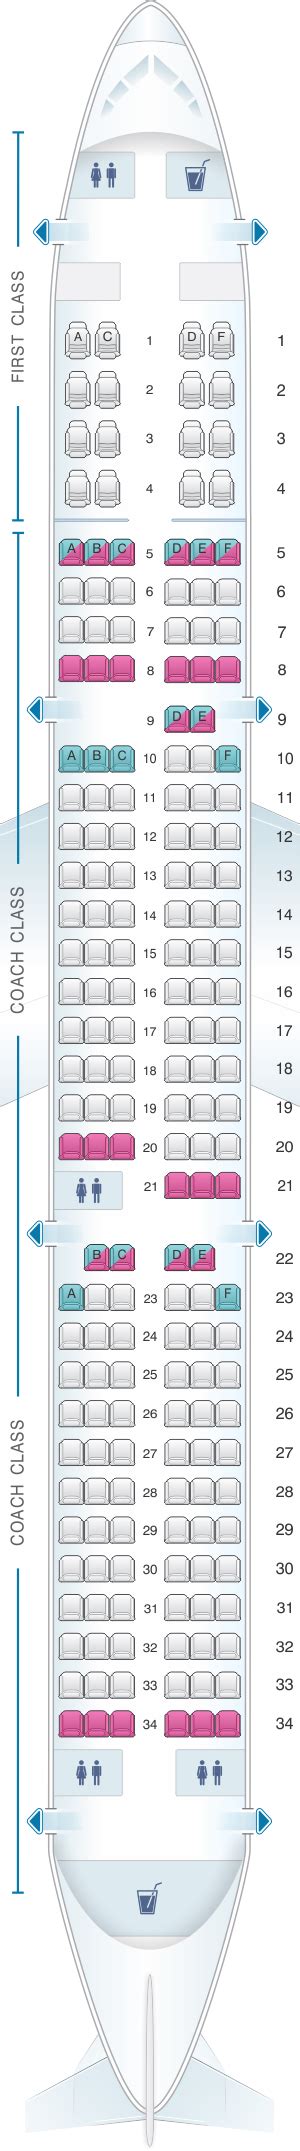 Airbus A321 Seat Map Gadgets 2018